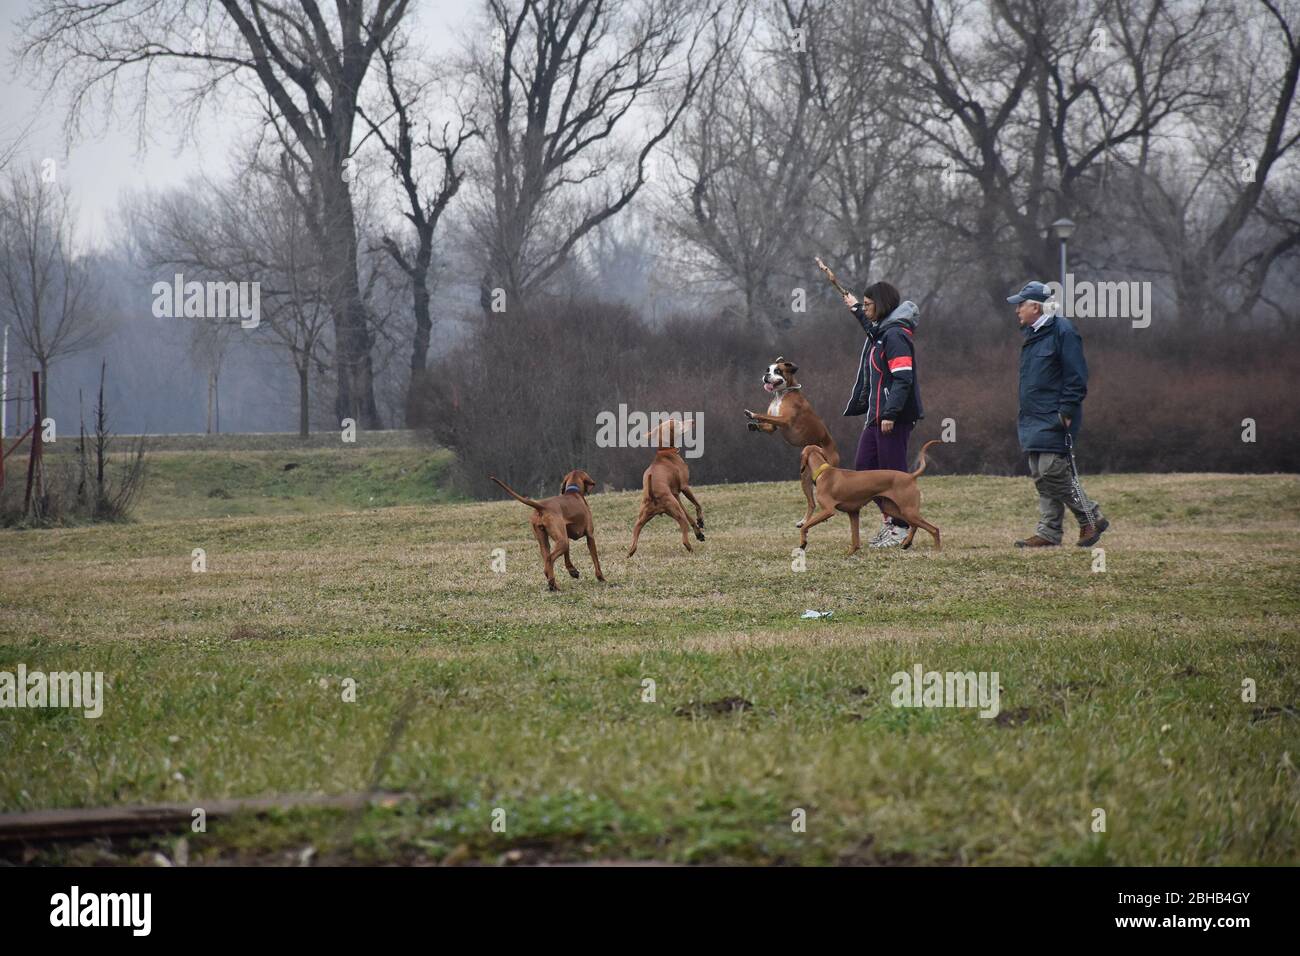 Four racial dogs jump around a girl throwing a stick at them Stock Photo